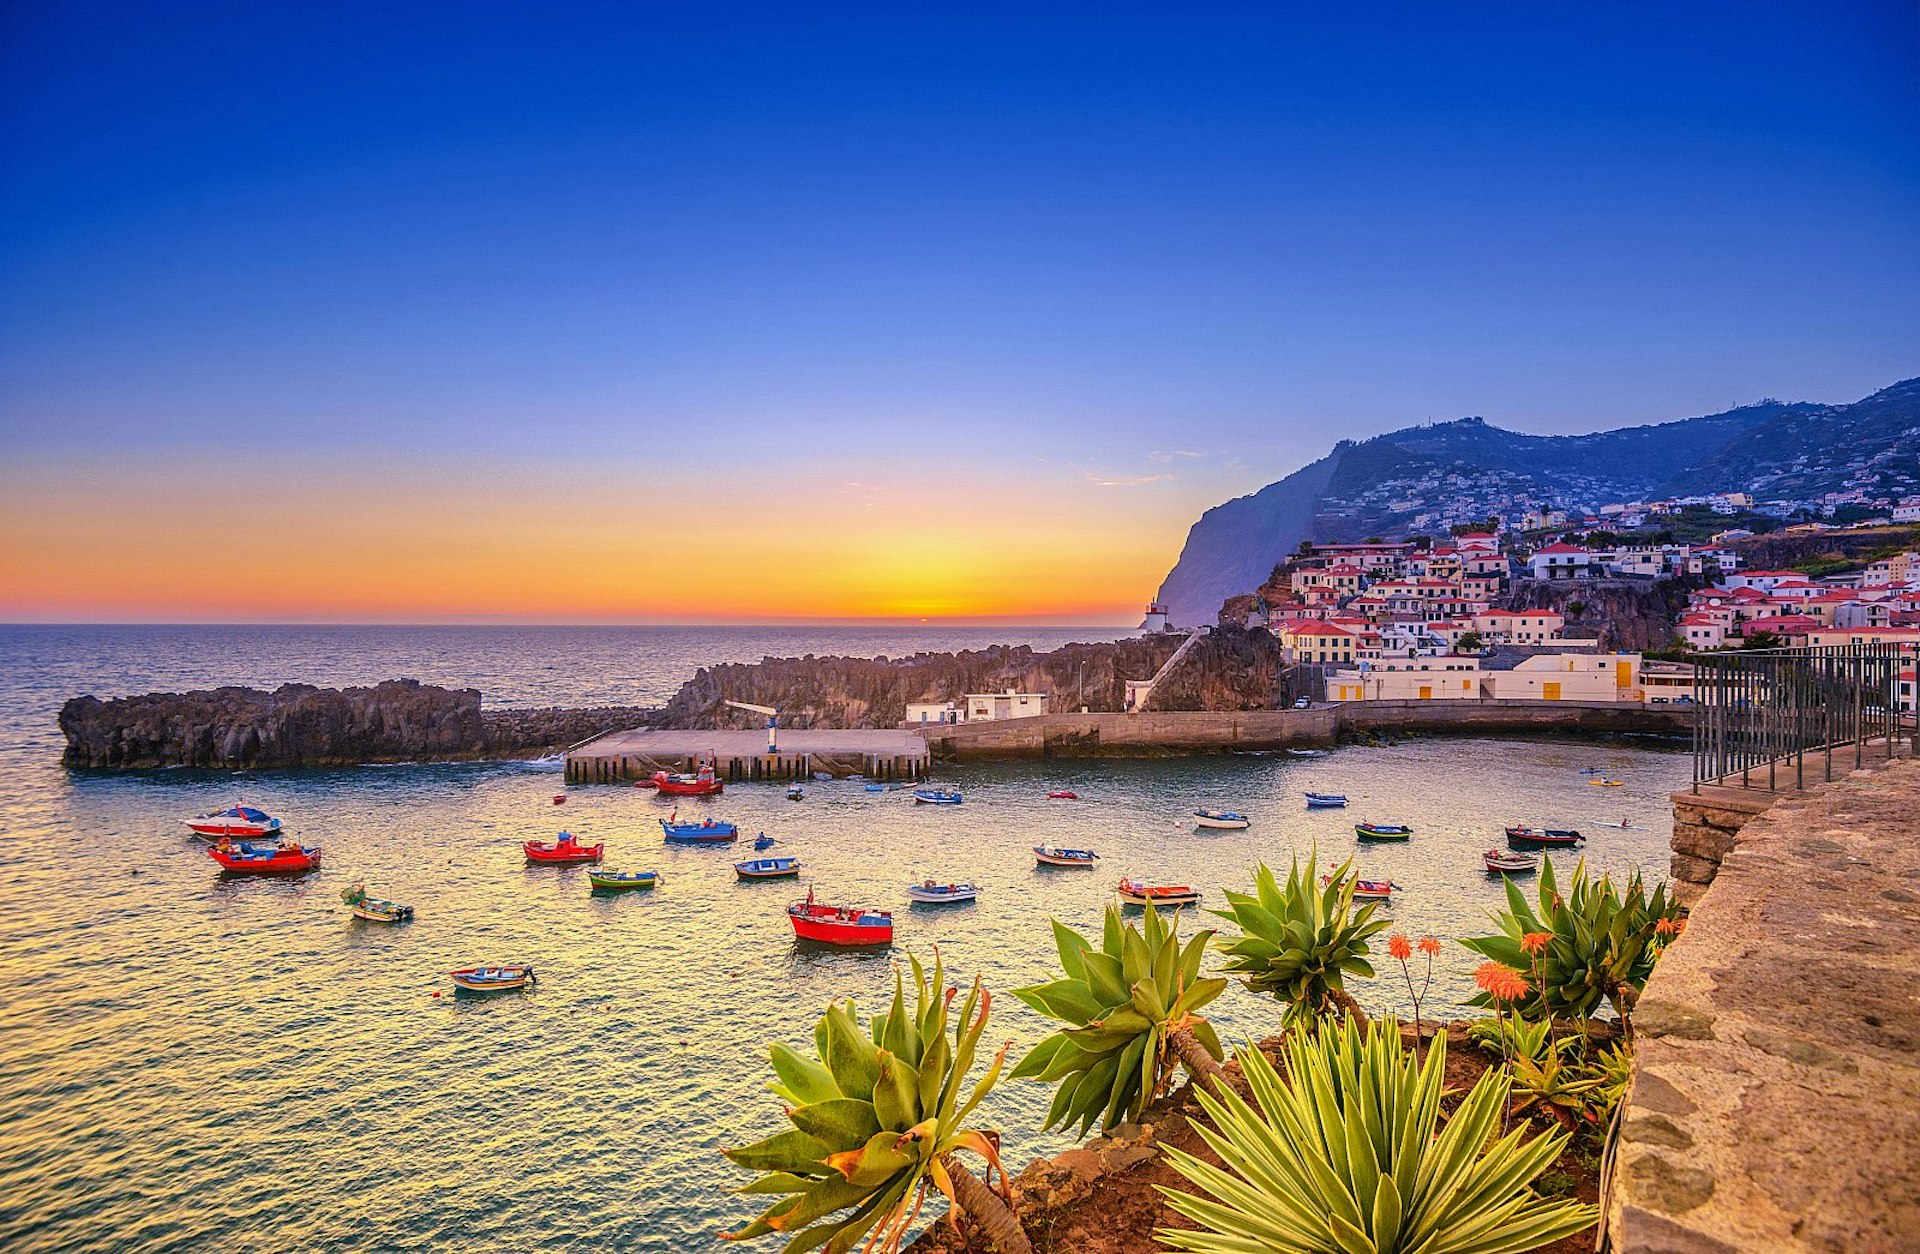 The fishing village of Câmara de Lobos at sunset; in the distance is the Cabo Girão, with some of the world's highest sea cliffs. There are small colourful fishing boats in the harbour and green succulents in the foreground. 